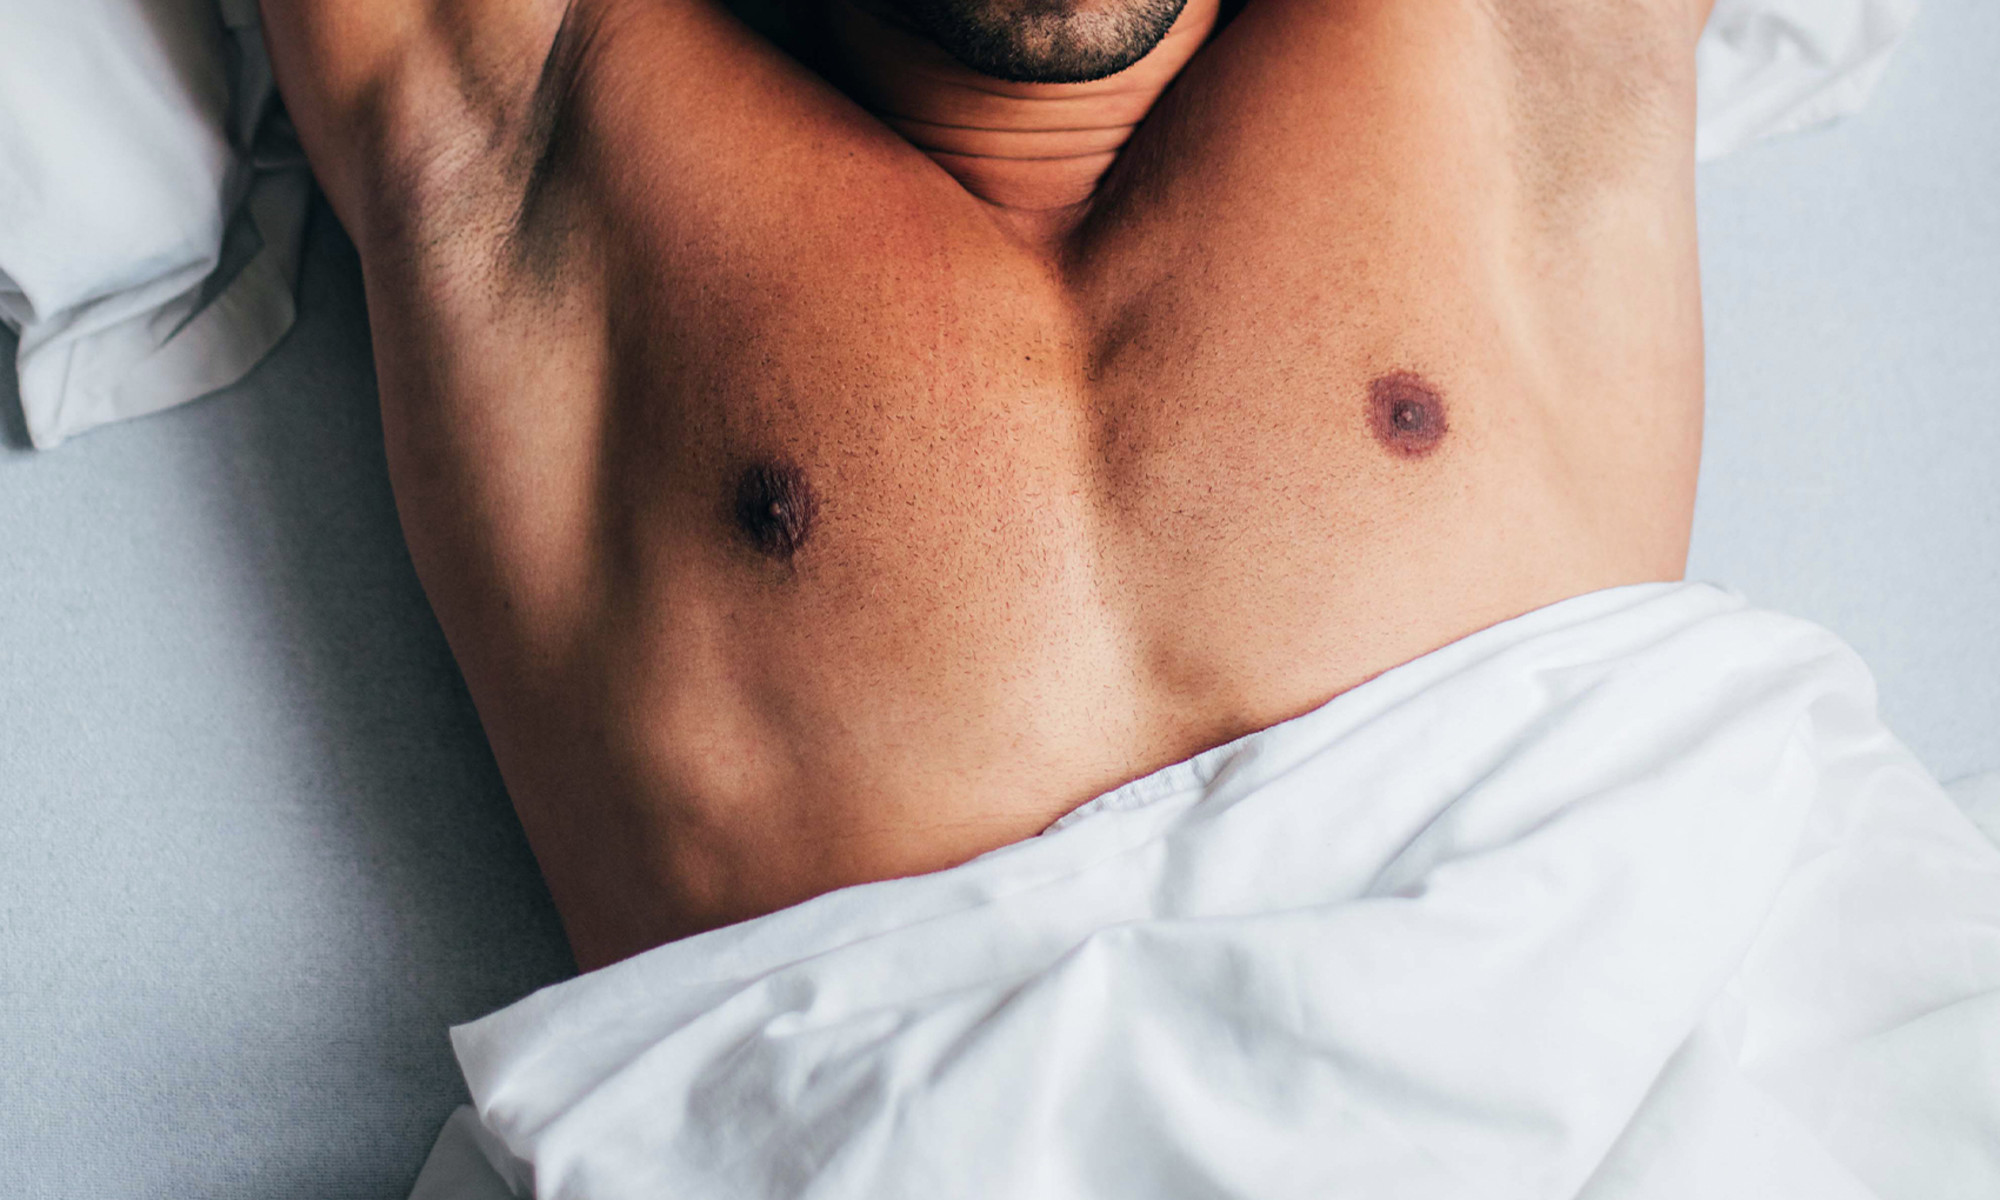 How To Use Male Nipple Play In Bed 17 Techniques and FAQs mindbodygreen